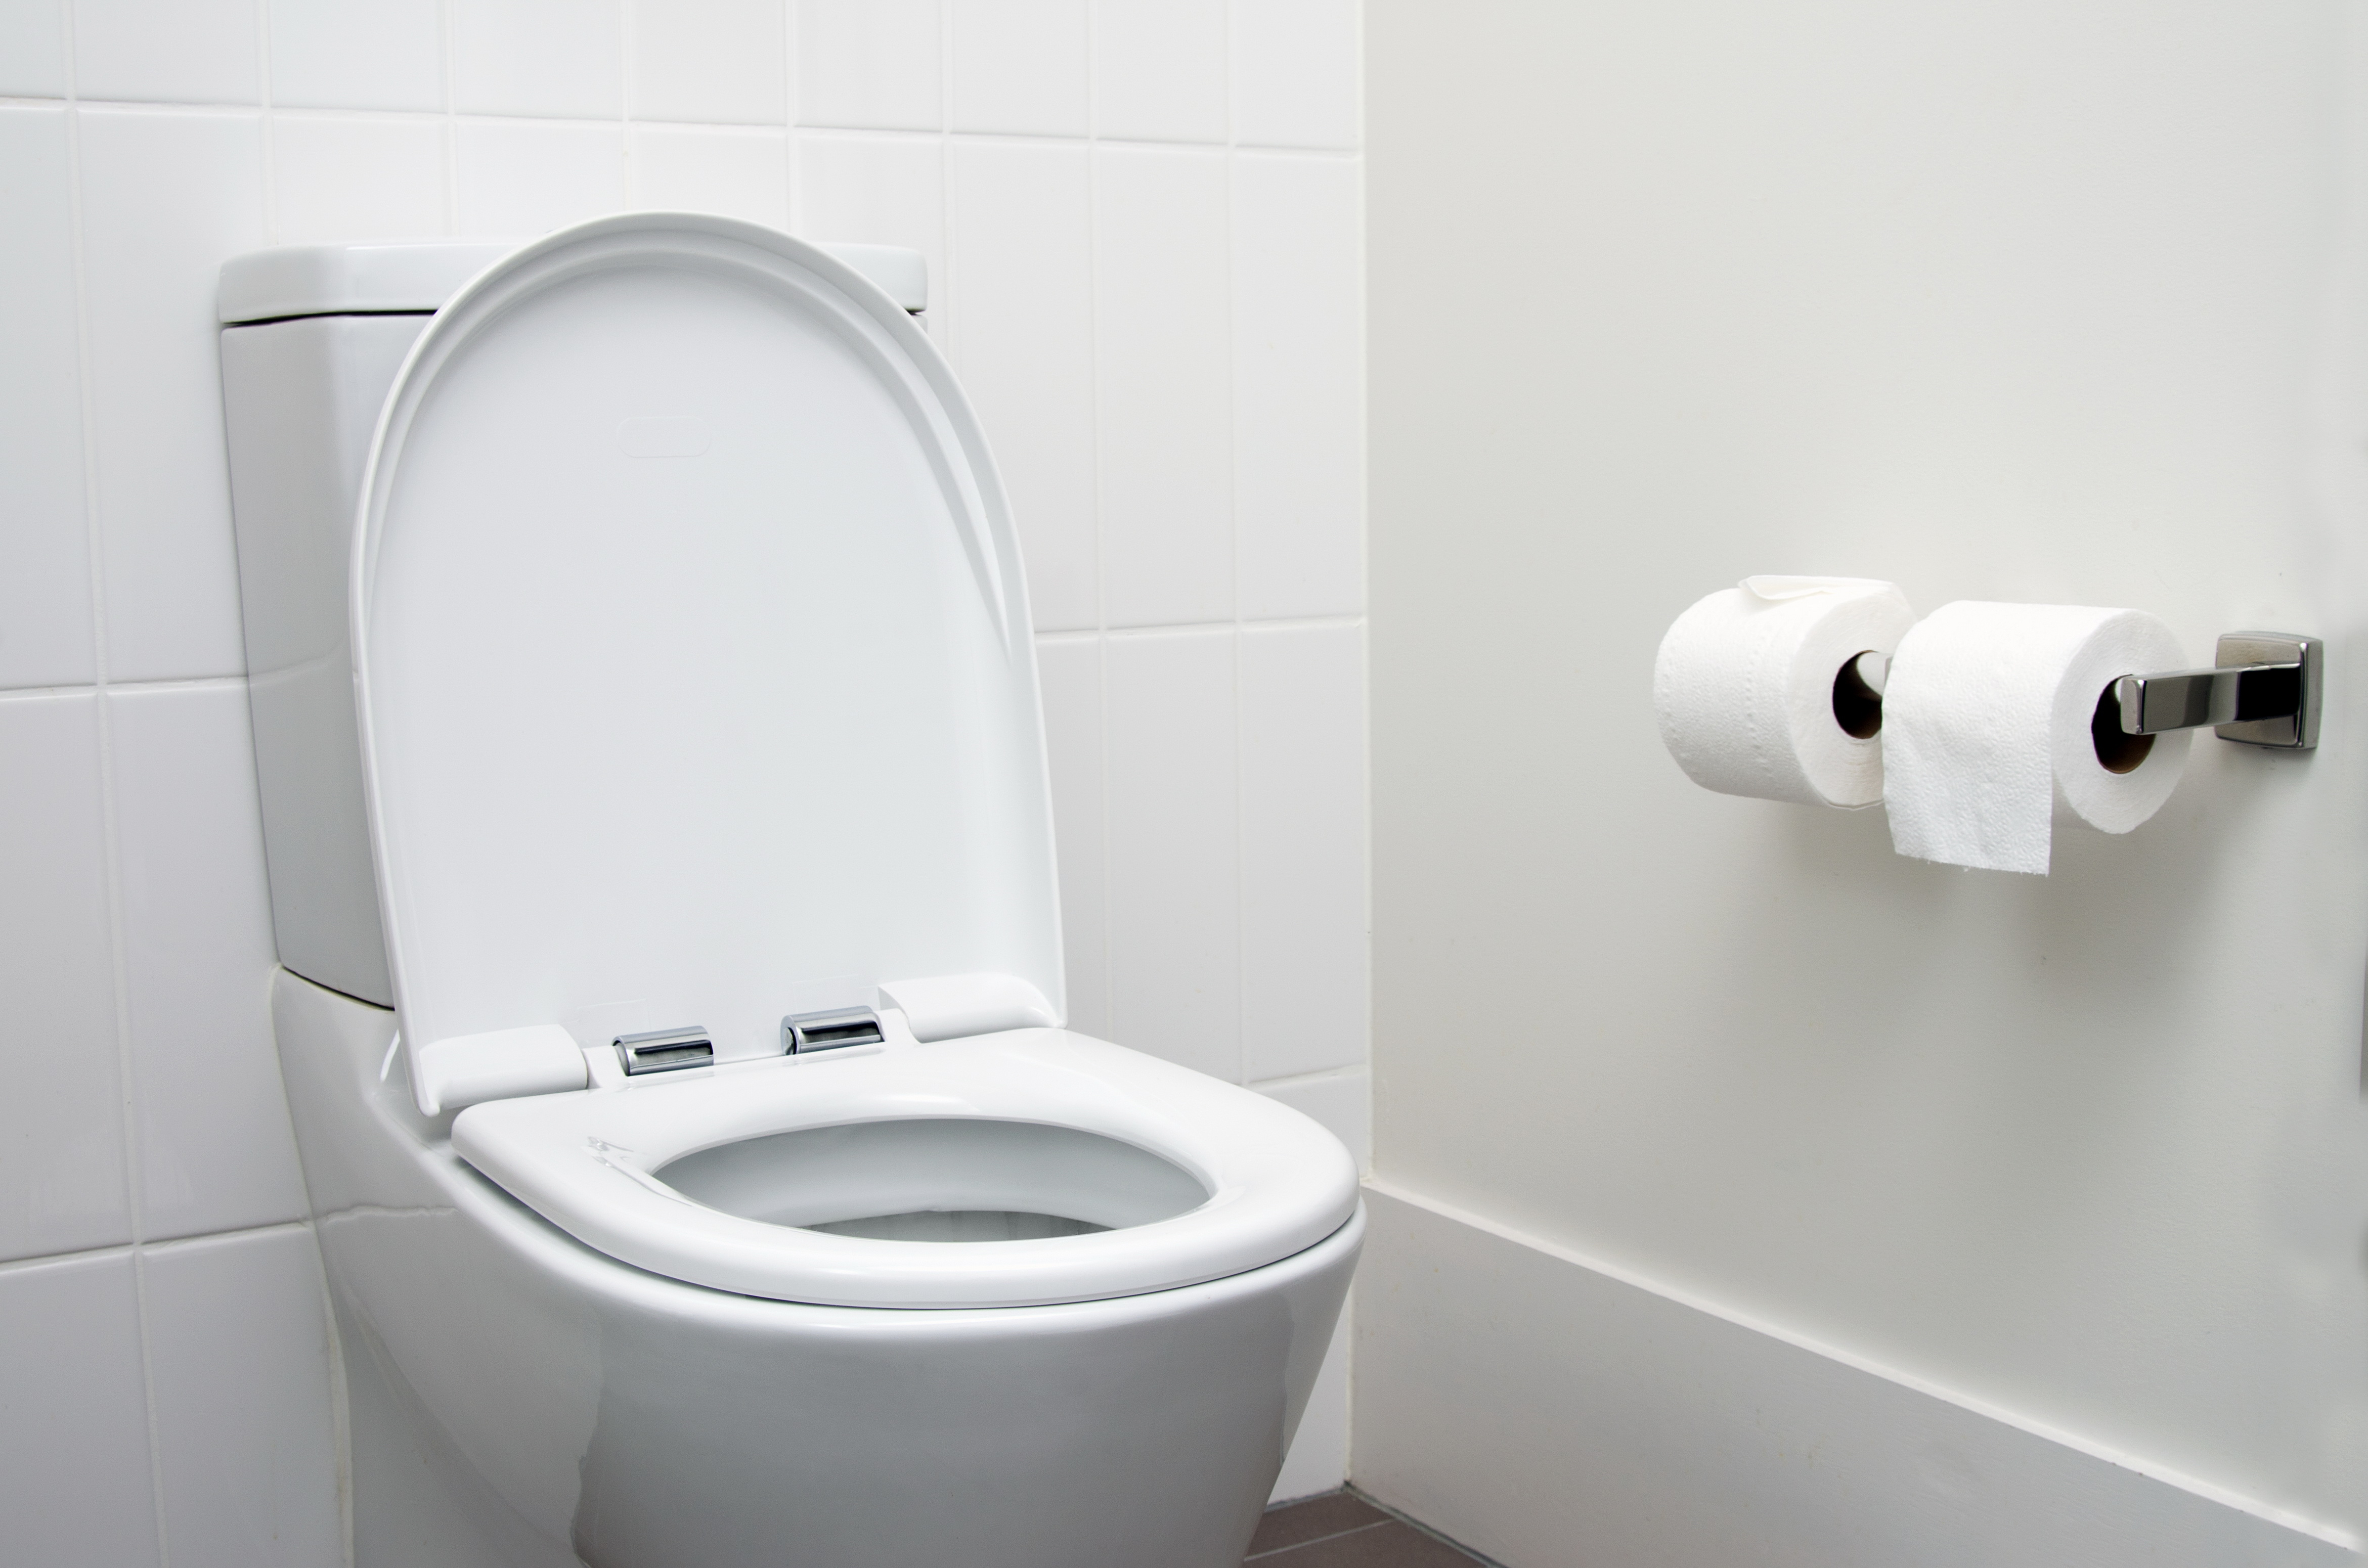 Toilet Paper Holder Buying Guide: The Basics You Need to Know